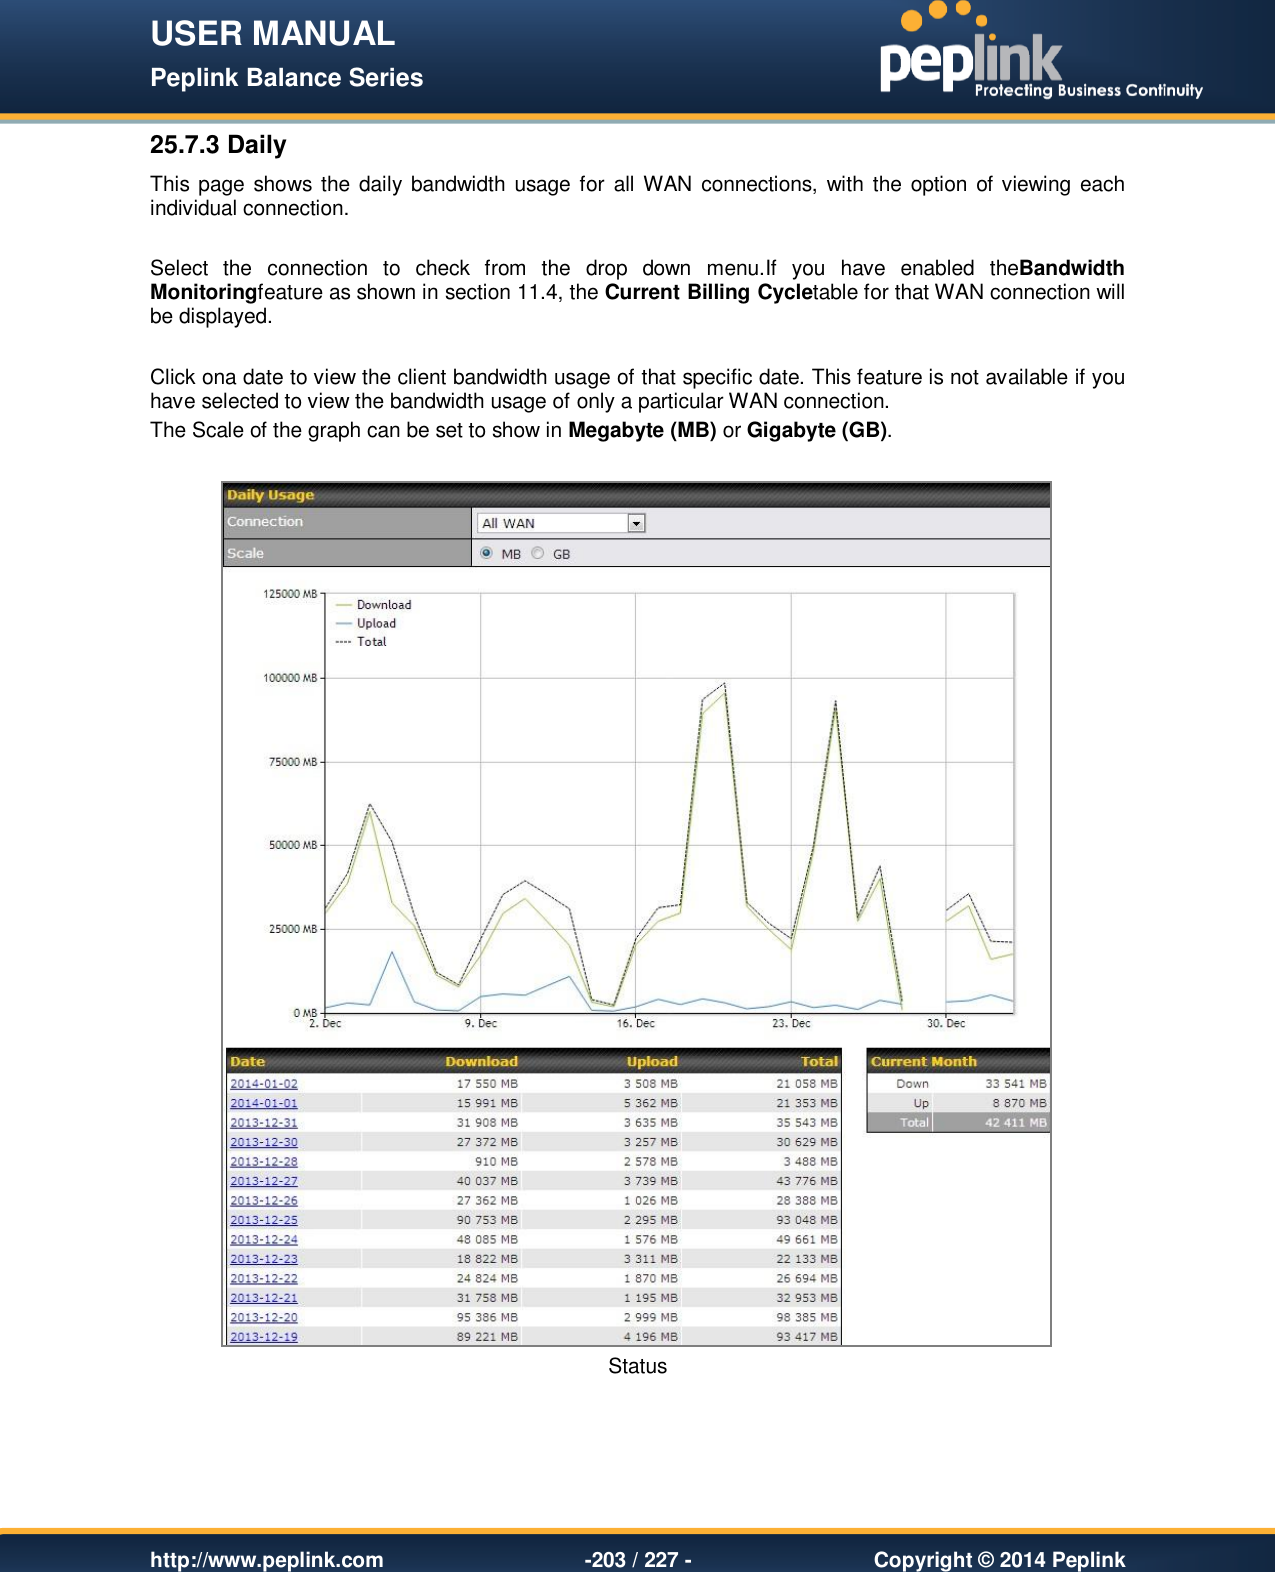 USER MANUAL Peplink Balance Series   http://www.peplink.com -203 / 227 -  Copyright © 2014 Peplink 25.7.3 Daily This page shows  the daily bandwidth  usage for all WAN  connections, with the option of viewing each individual connection.   Select  the  connection  to  check  from  the  drop  down  menu.If  you  have  enabled  theBandwidth Monitoringfeature as shown in section 11.4, the Current Billing Cycletable for that WAN connection will be displayed.  Click ona date to view the client bandwidth usage of that specific date. This feature is not available if you have selected to view the bandwidth usage of only a particular WAN connection. The Scale of the graph can be set to show in Megabyte (MB) or Gigabyte (GB).   Status  